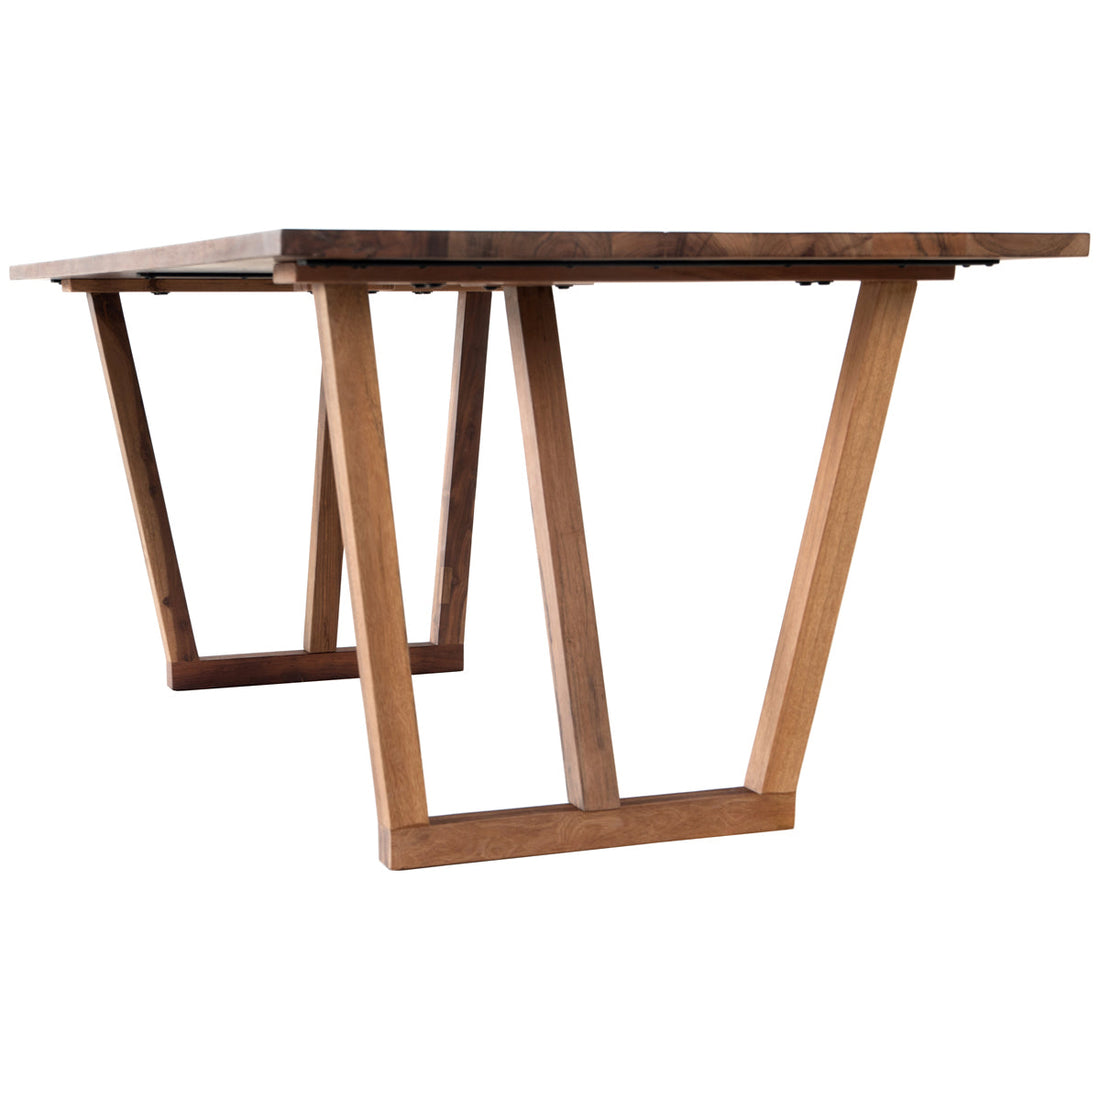 Four Hands Merritt Cyril Dining Table - Natural Reclaimed